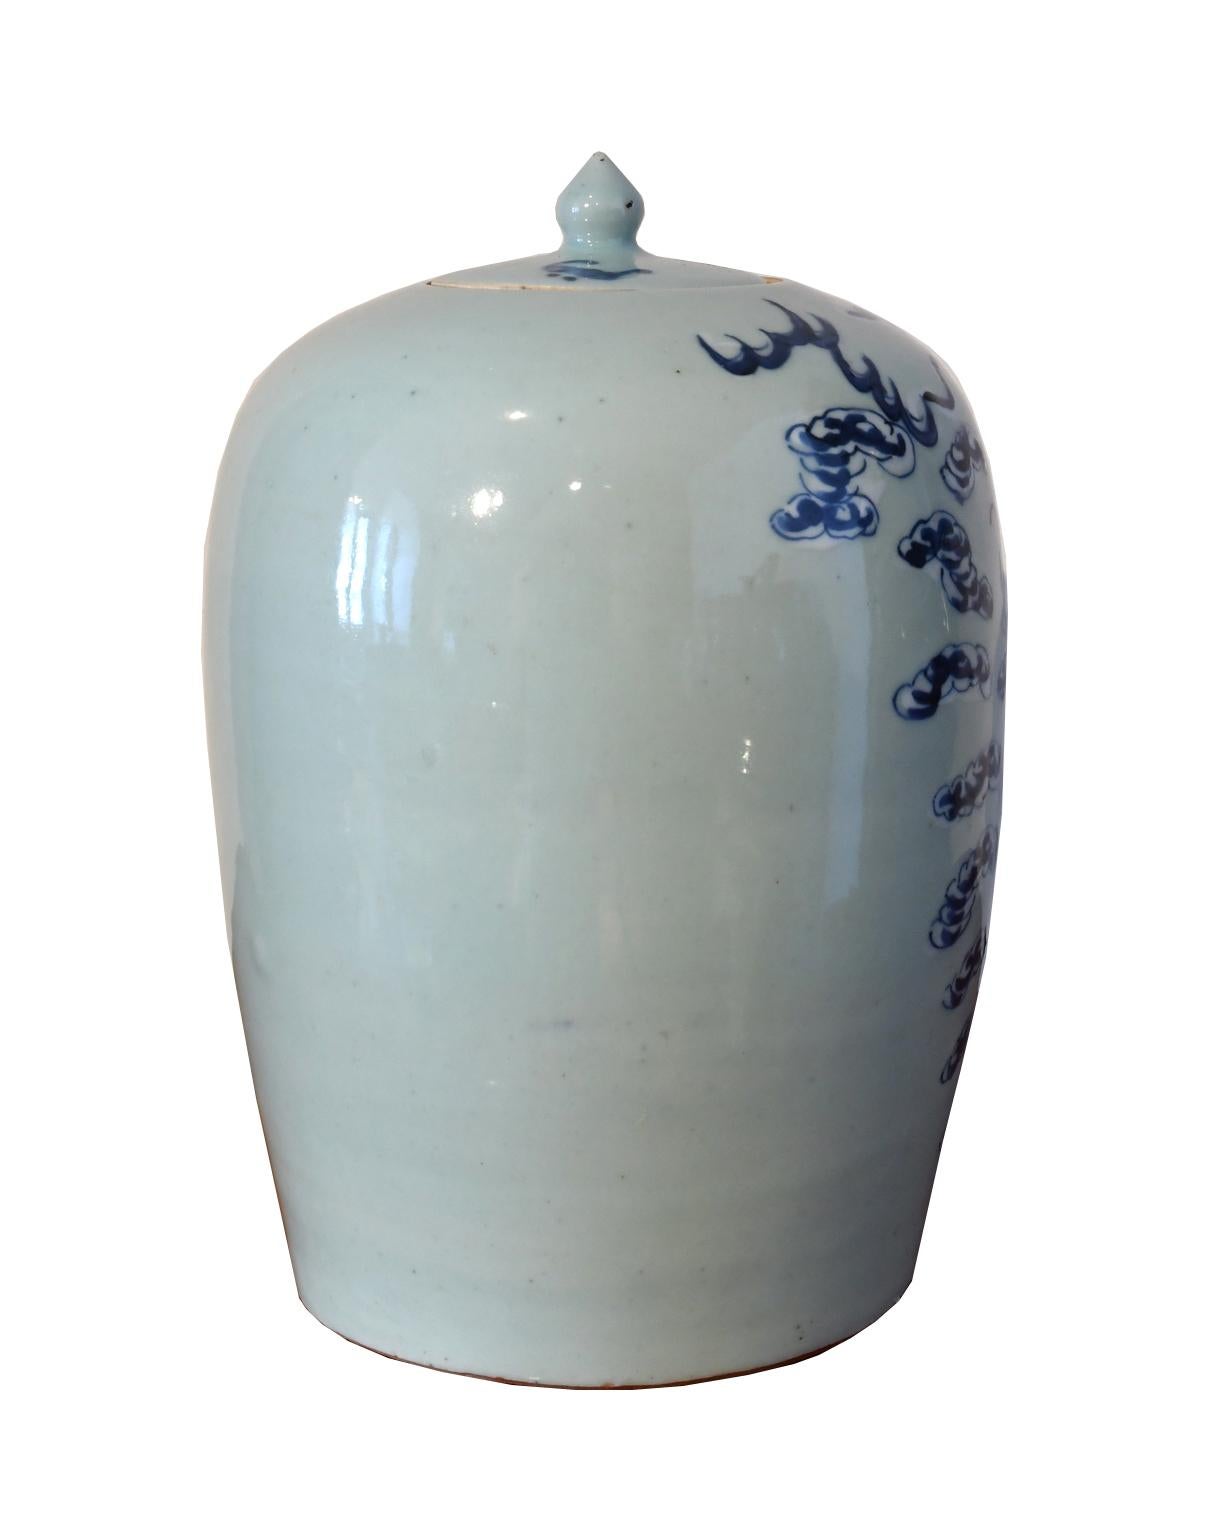 Qing Chinese Blue & White Porcelain Lidded Jar w Hand Painted Five-Clawed Dragon (Glasiert) im Angebot